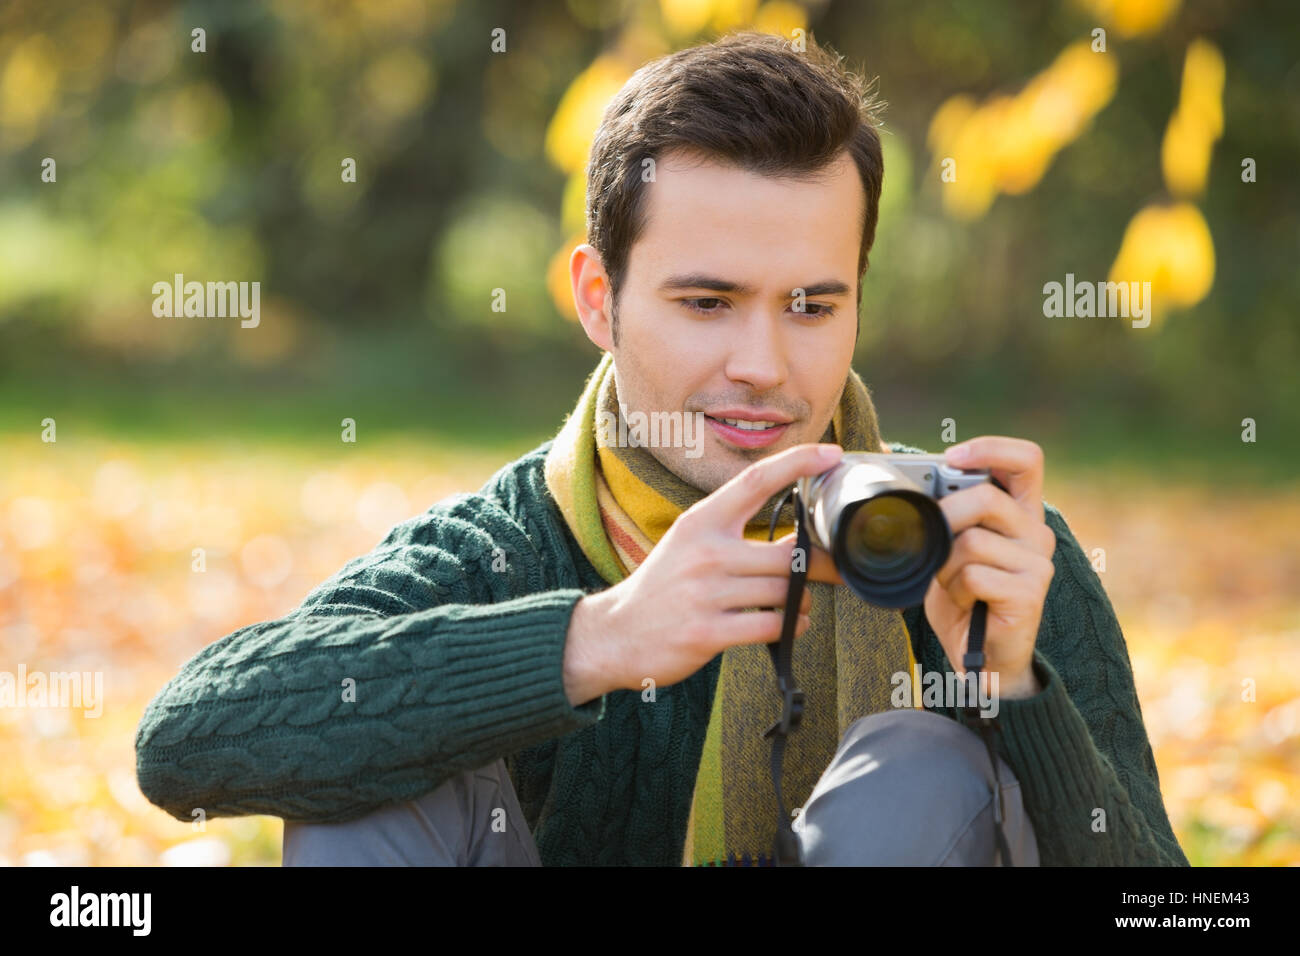 Young man watching photographs on digital camera in park during autumn Stock Photo